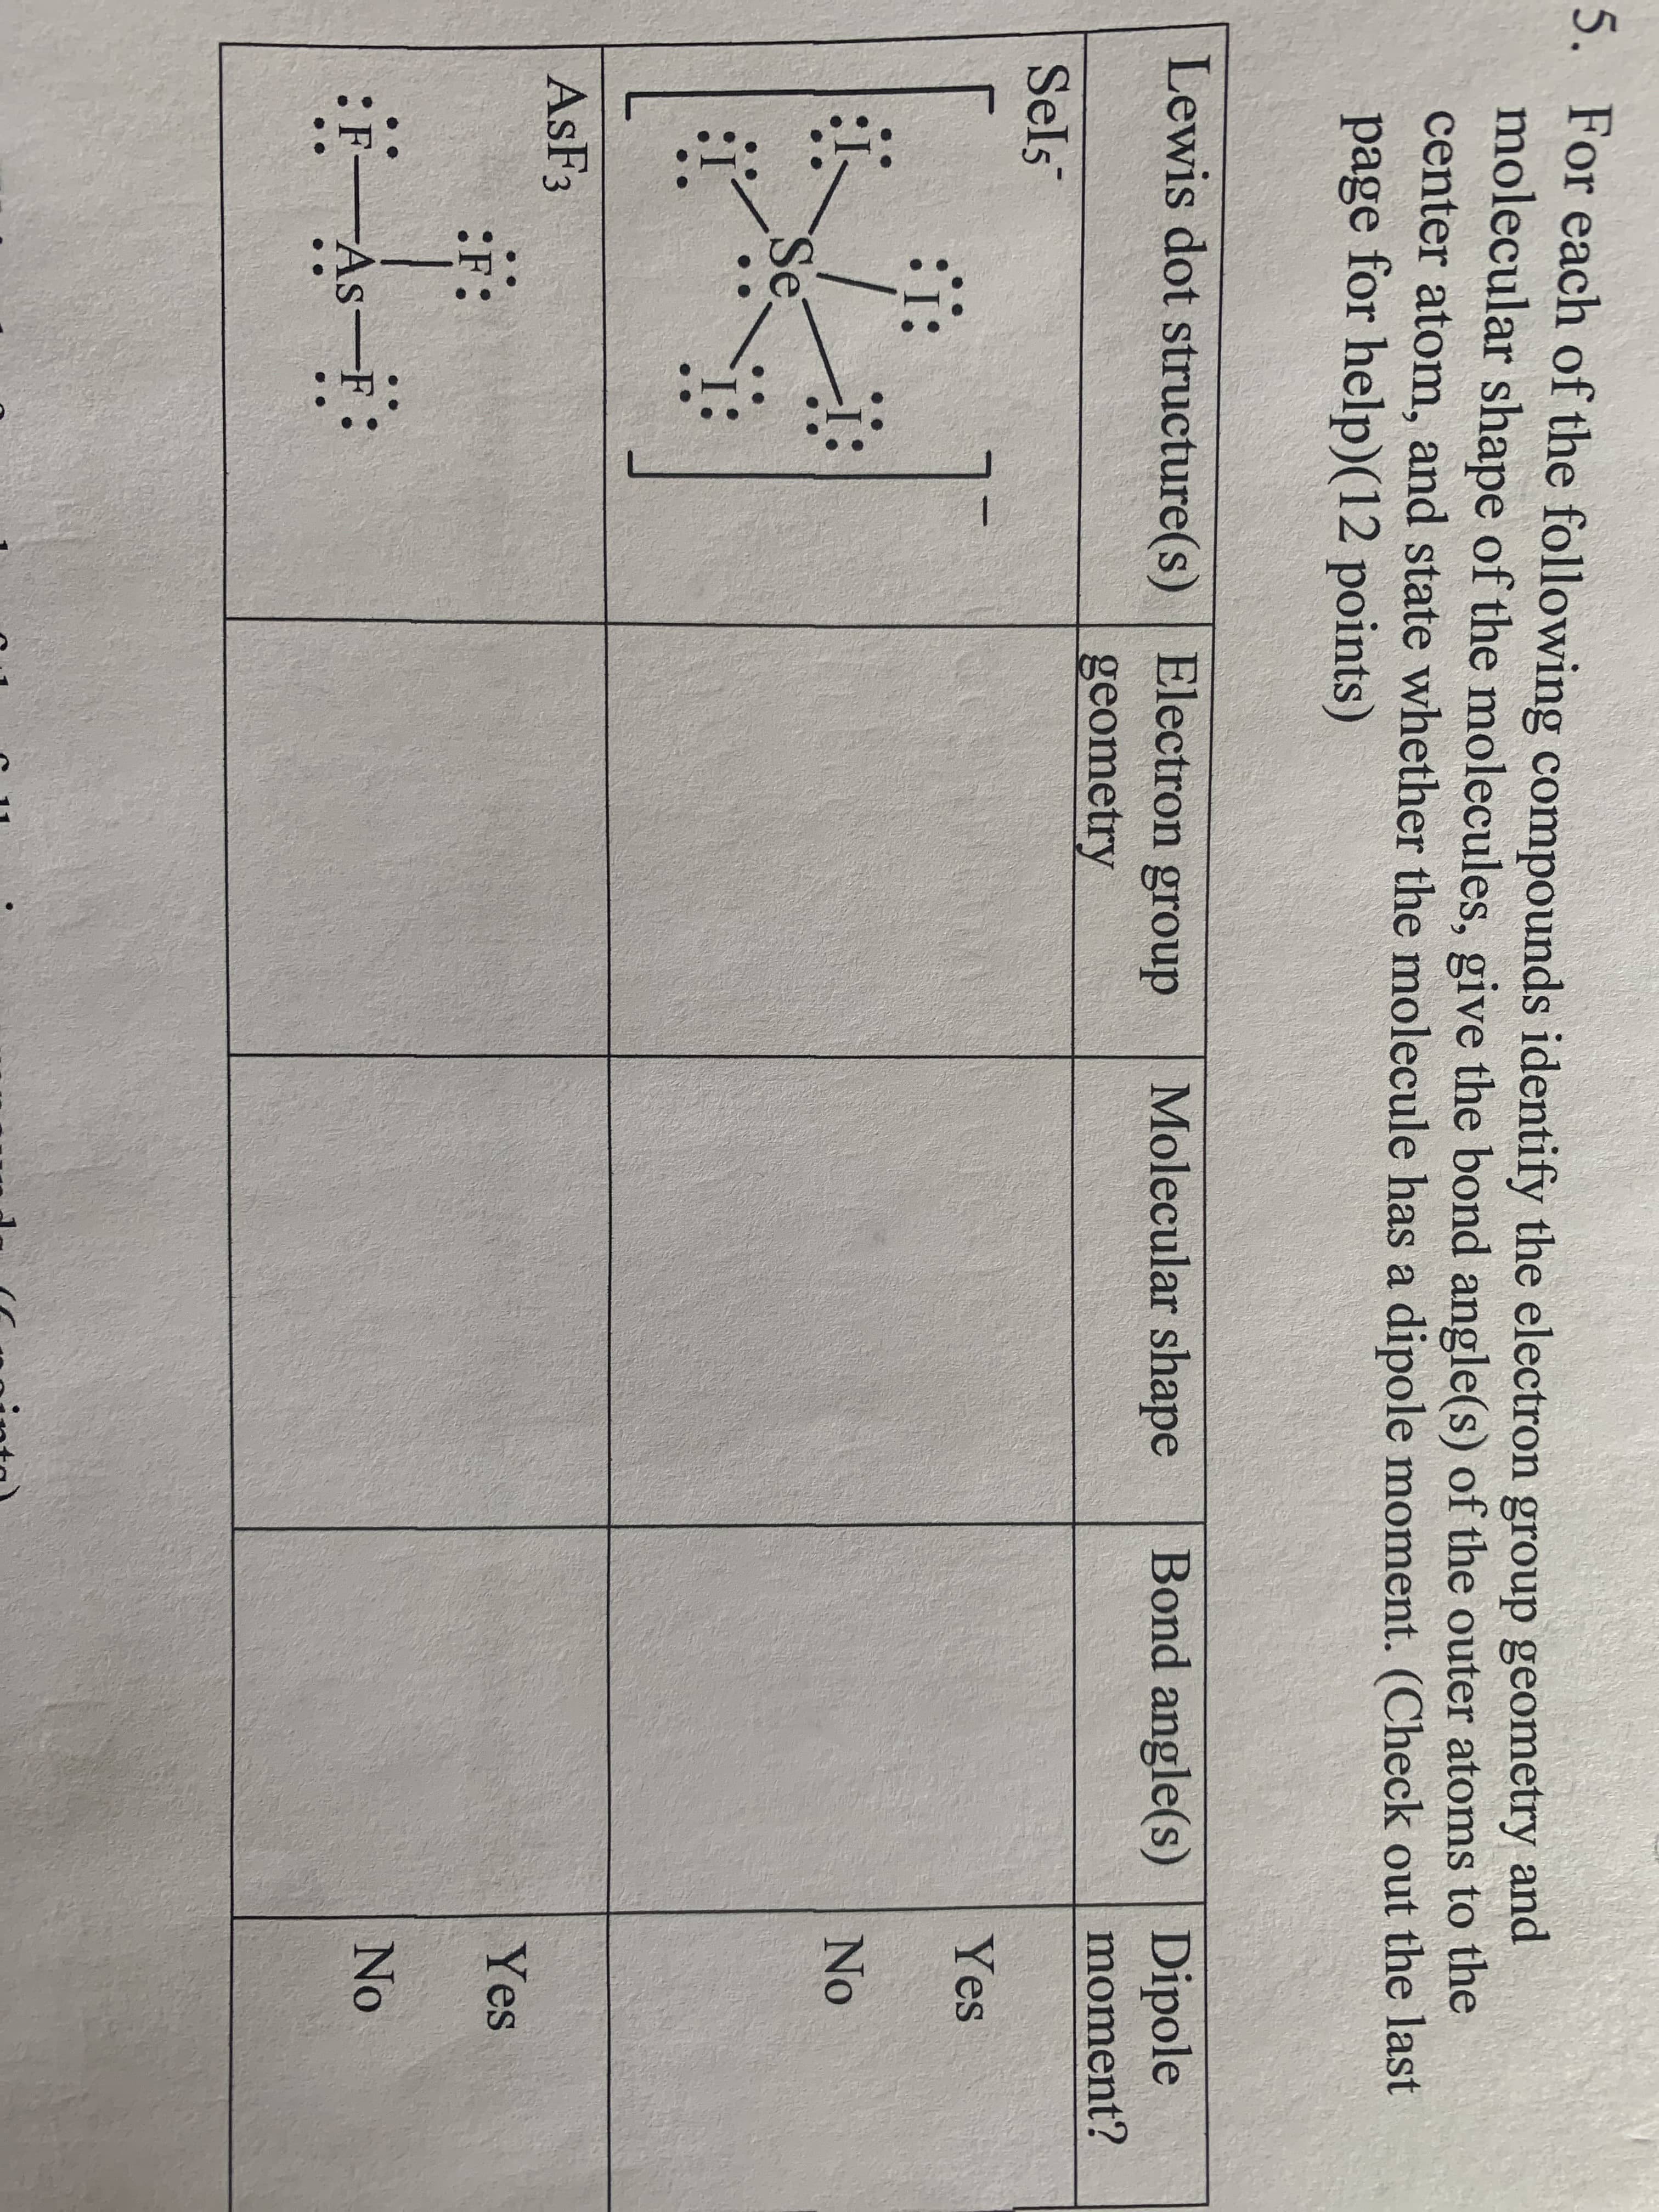 5. For each of the following compounds identify the electron group geometry and
molecular shape of the molecules, give the bond angle(s) of the outer atoms to the
center atom, and state whether the molecule has a dipole moment. (Check out the last
page for help)(12 points)
Bond angle(s) Dipole
moment?
Lewis dot structure(s) | Electron group
Molecular shape
geometry
Sels
Yes
No
Se
ASF3
Yes
:F:
No
F-As-F:
